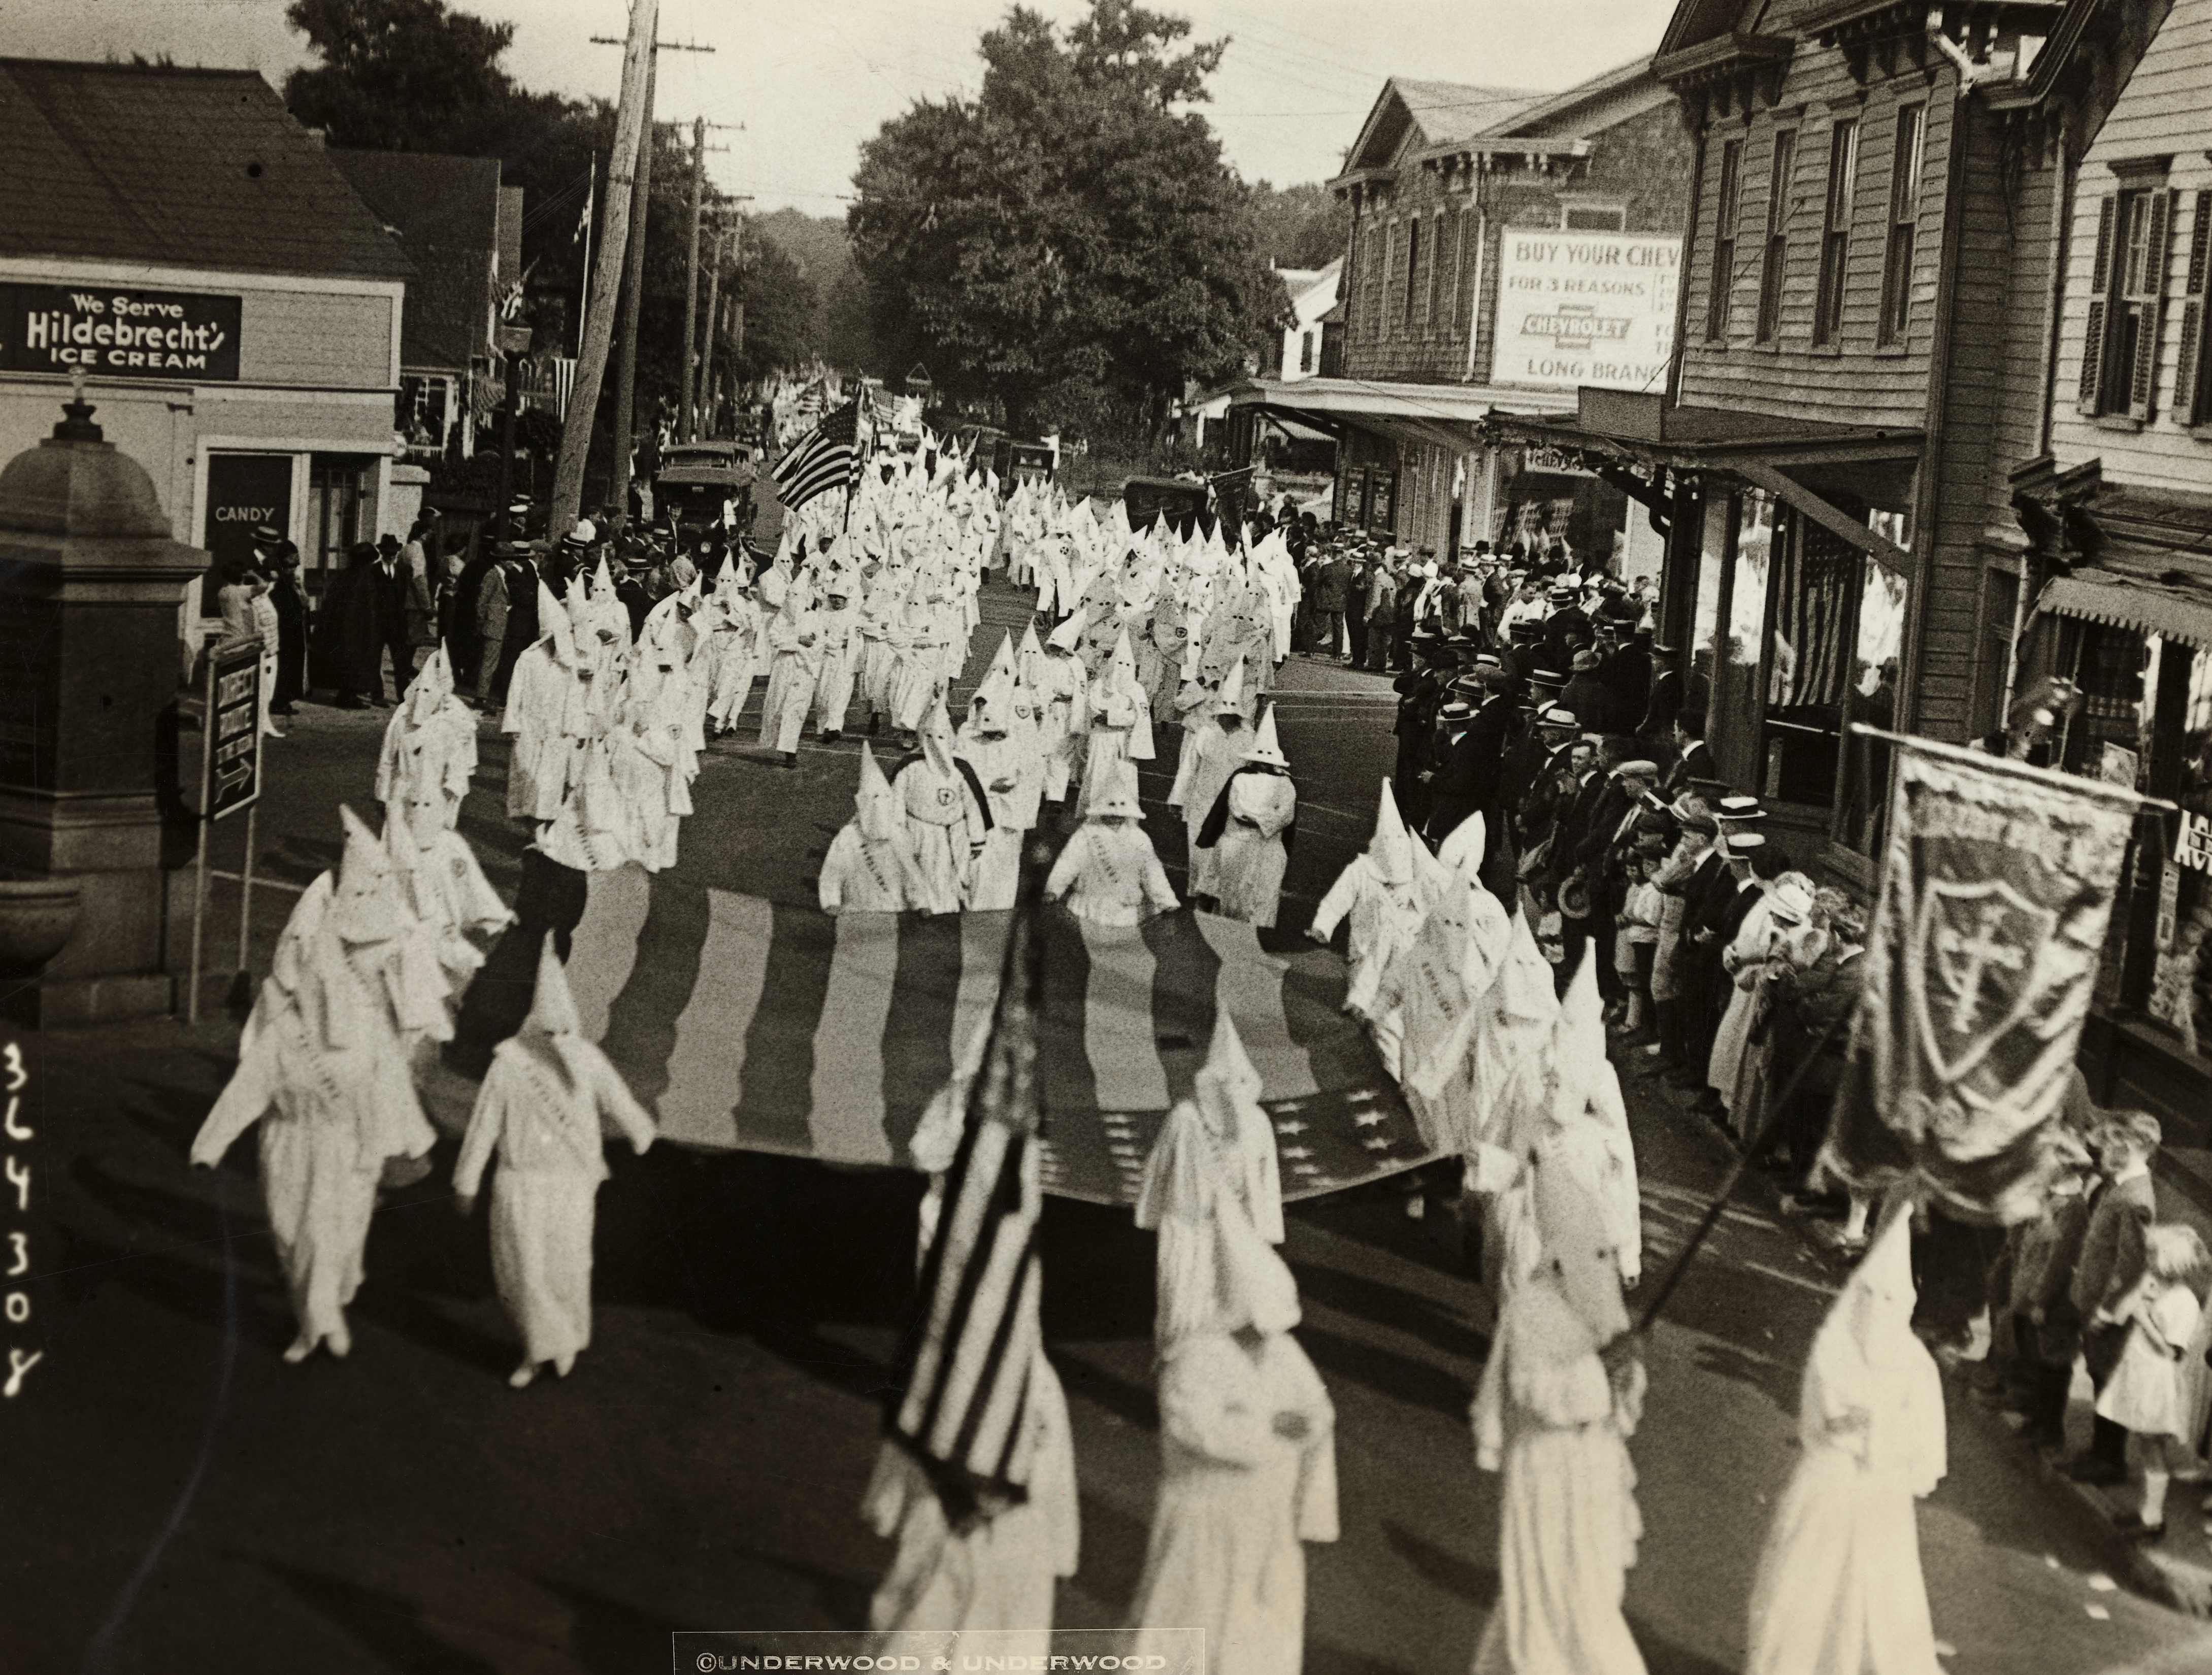 How 'The Birth of a Nation' Revived the Ku Klux Klan